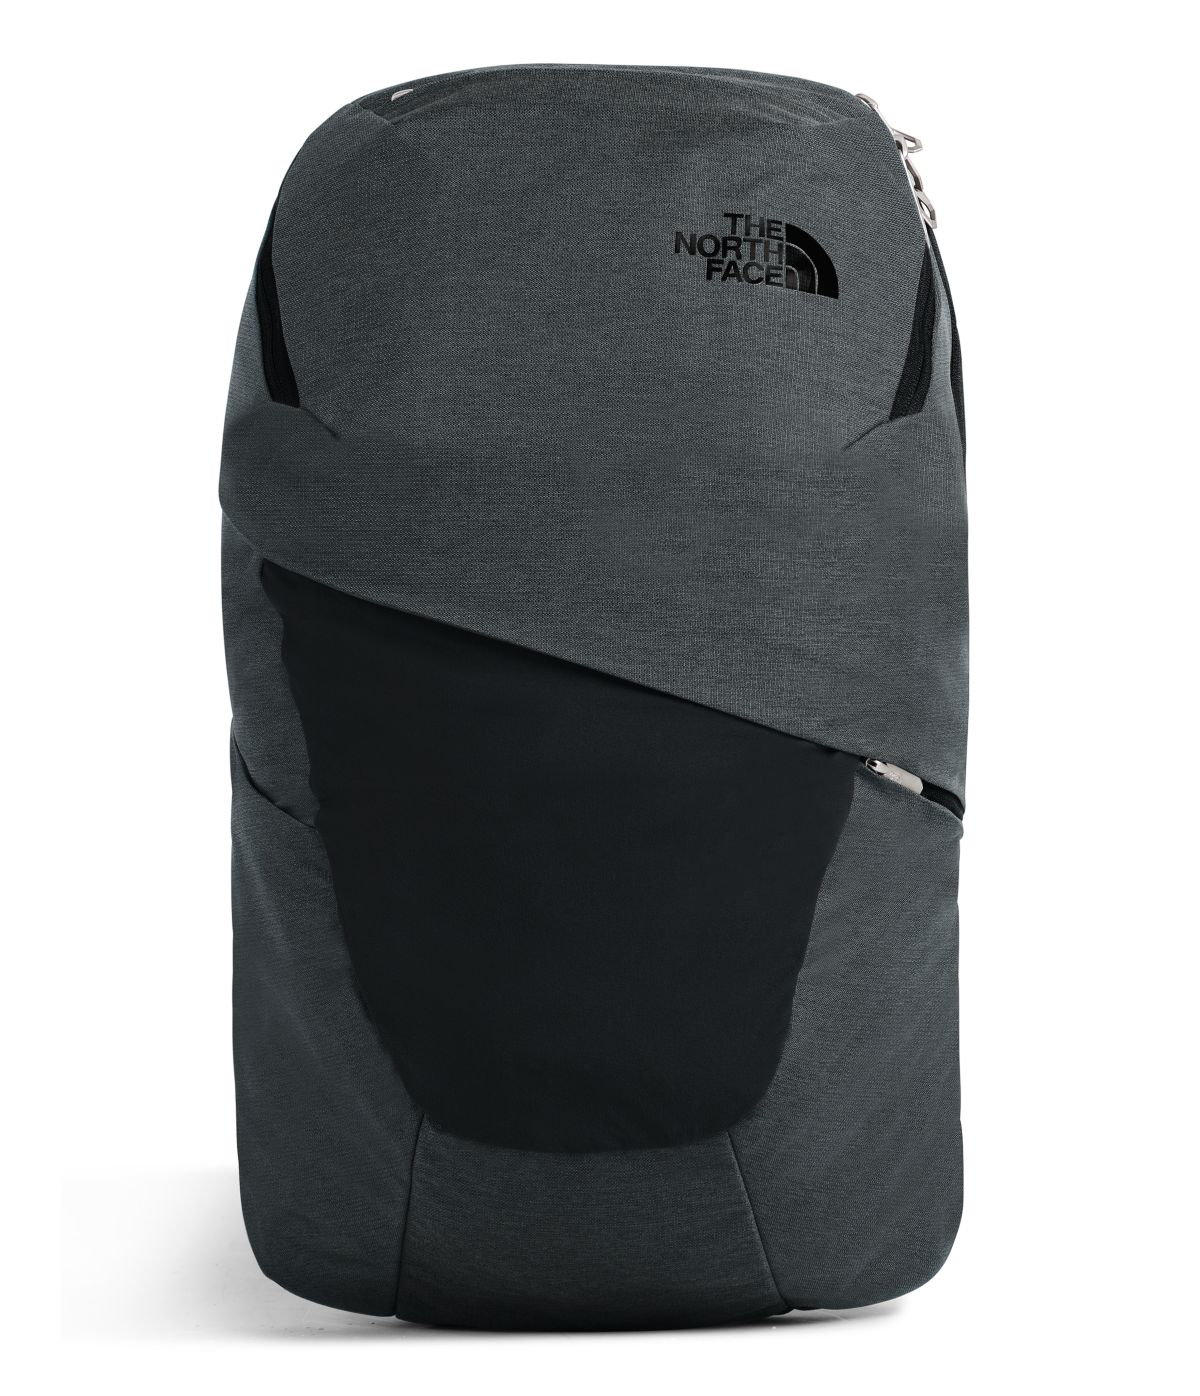 Women's The North Face Aurora Backpack in Asphalt Grey Light Heather/TNF Black from front view